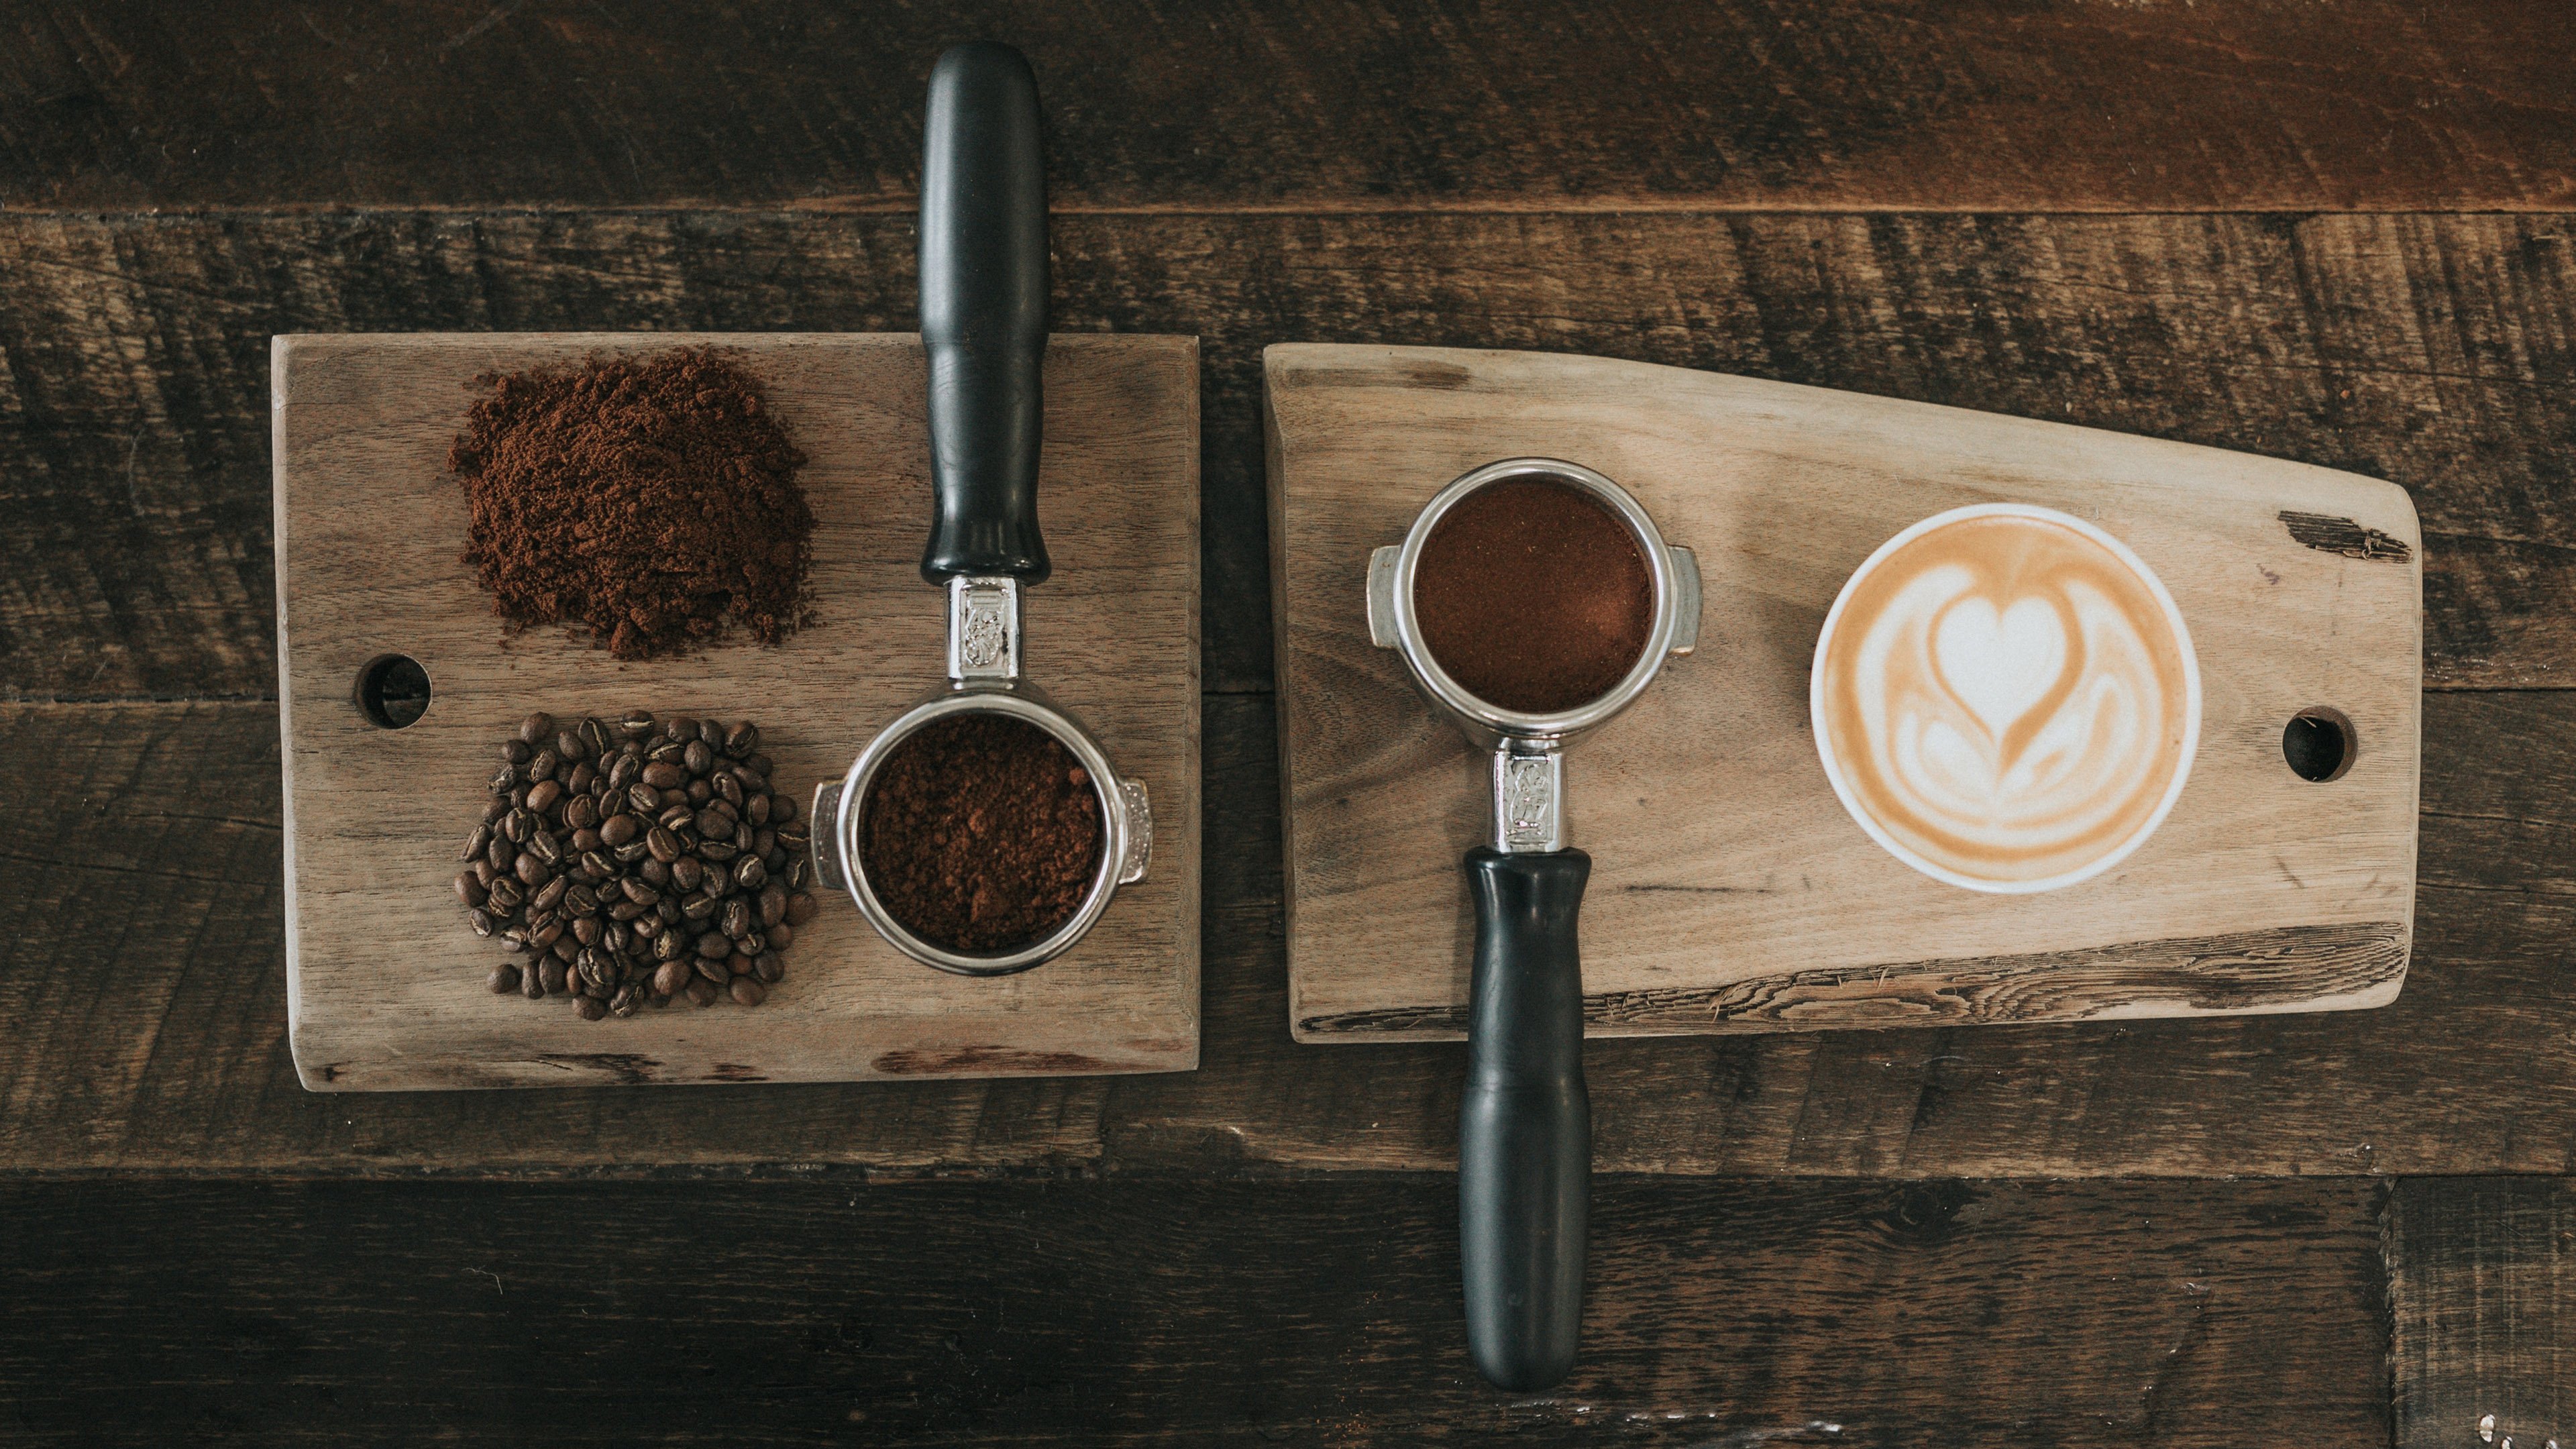 coffee, Coffee beans, Latte, Latte art, Wooden surface, Wood, Texture, Ground coffee beans Wallpaper HD / Desktop and Mobile Background